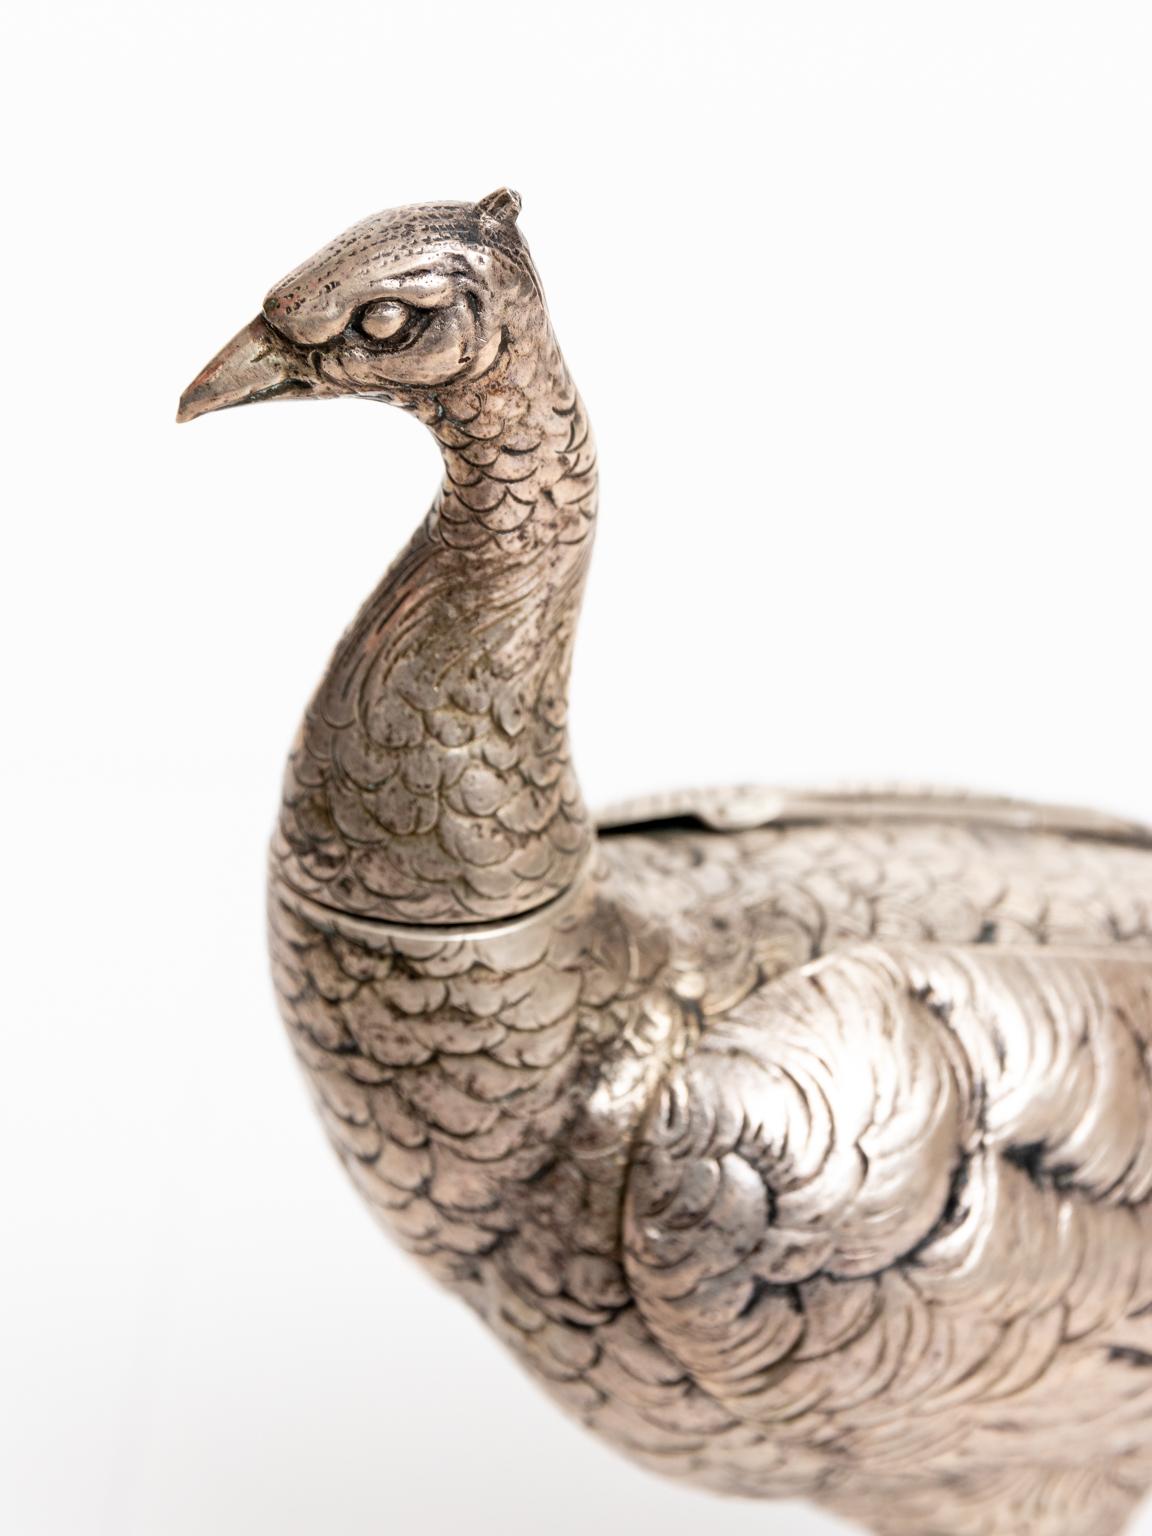 Circa early 20th century marked 800 silver German pheasant spice container with wings that spread. It is a complete piece and weighs 231.2 Grams. The spices are poured out from a dispenser in the removable head. Made in Germany. Please note of wear